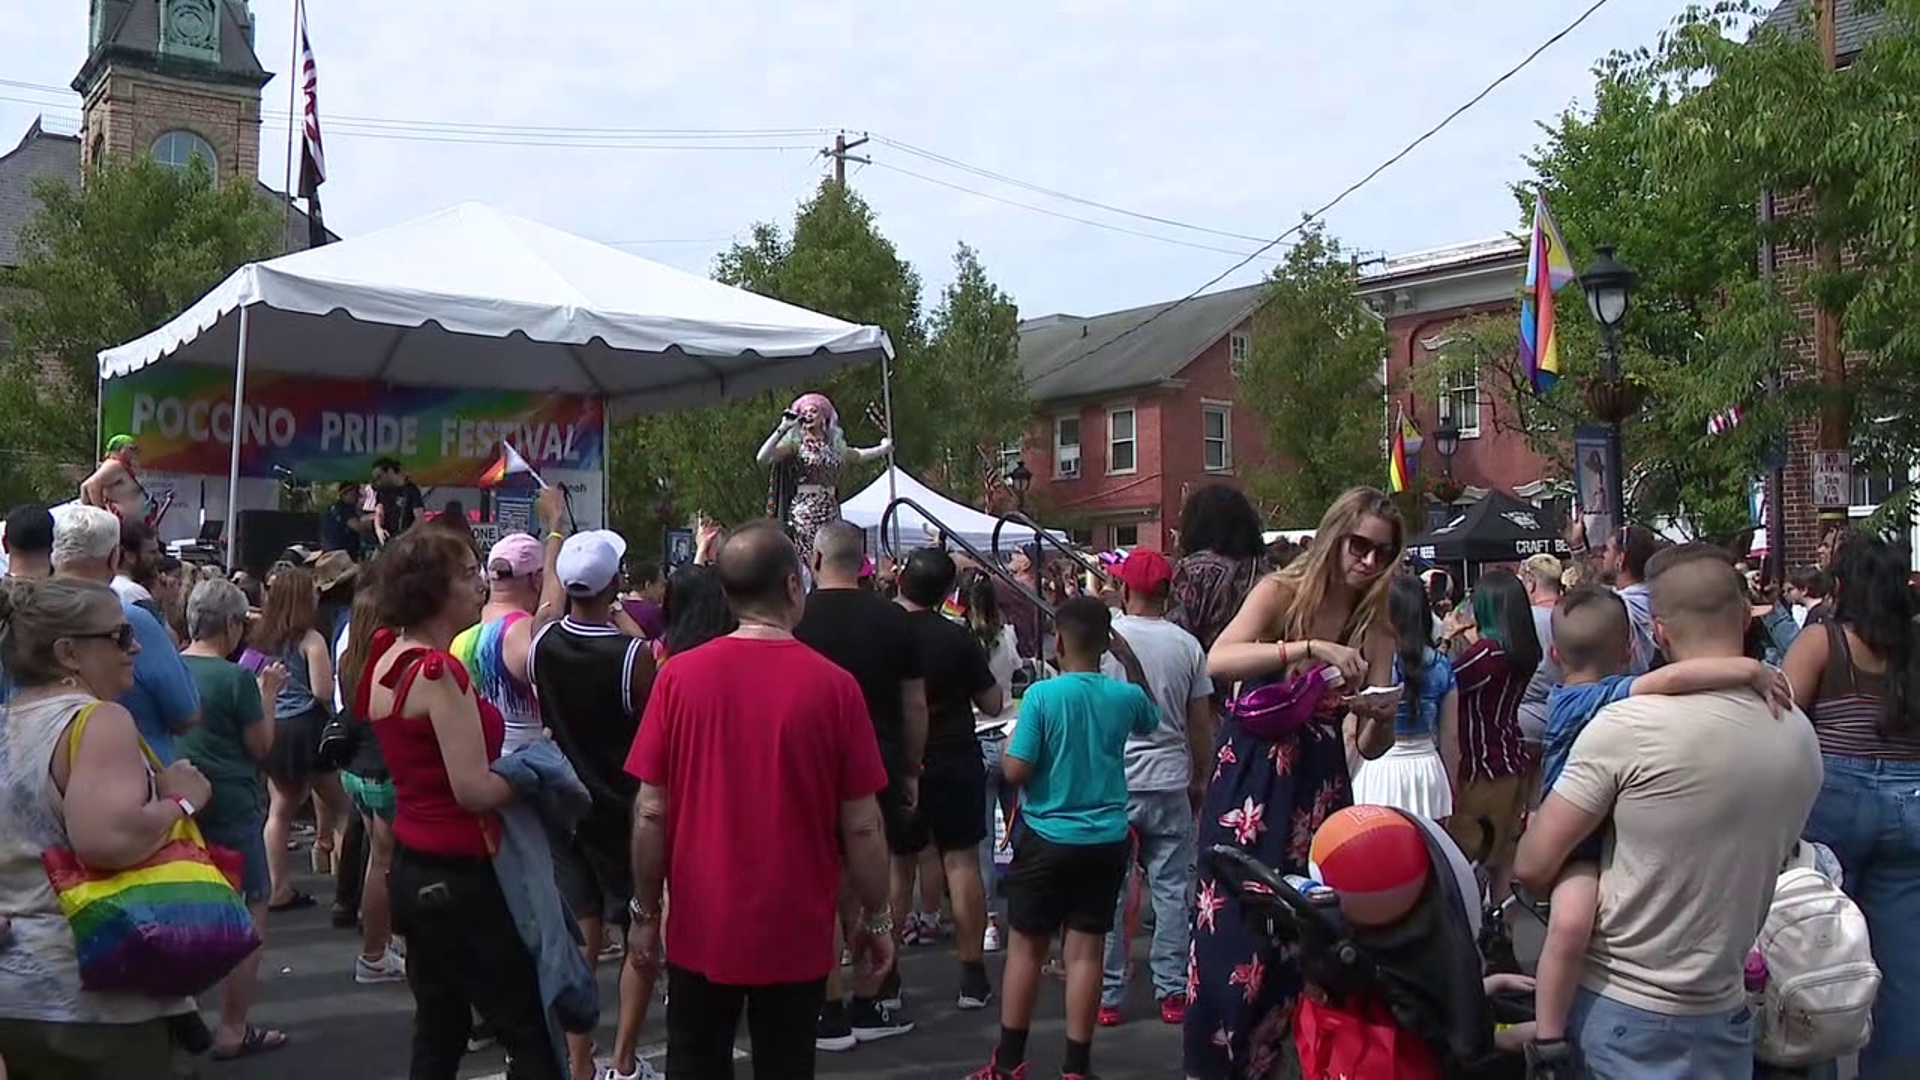 Folks gathered in downtown Stroudsburg on Sunday for the 4th Annual Pocono Pride Festival.